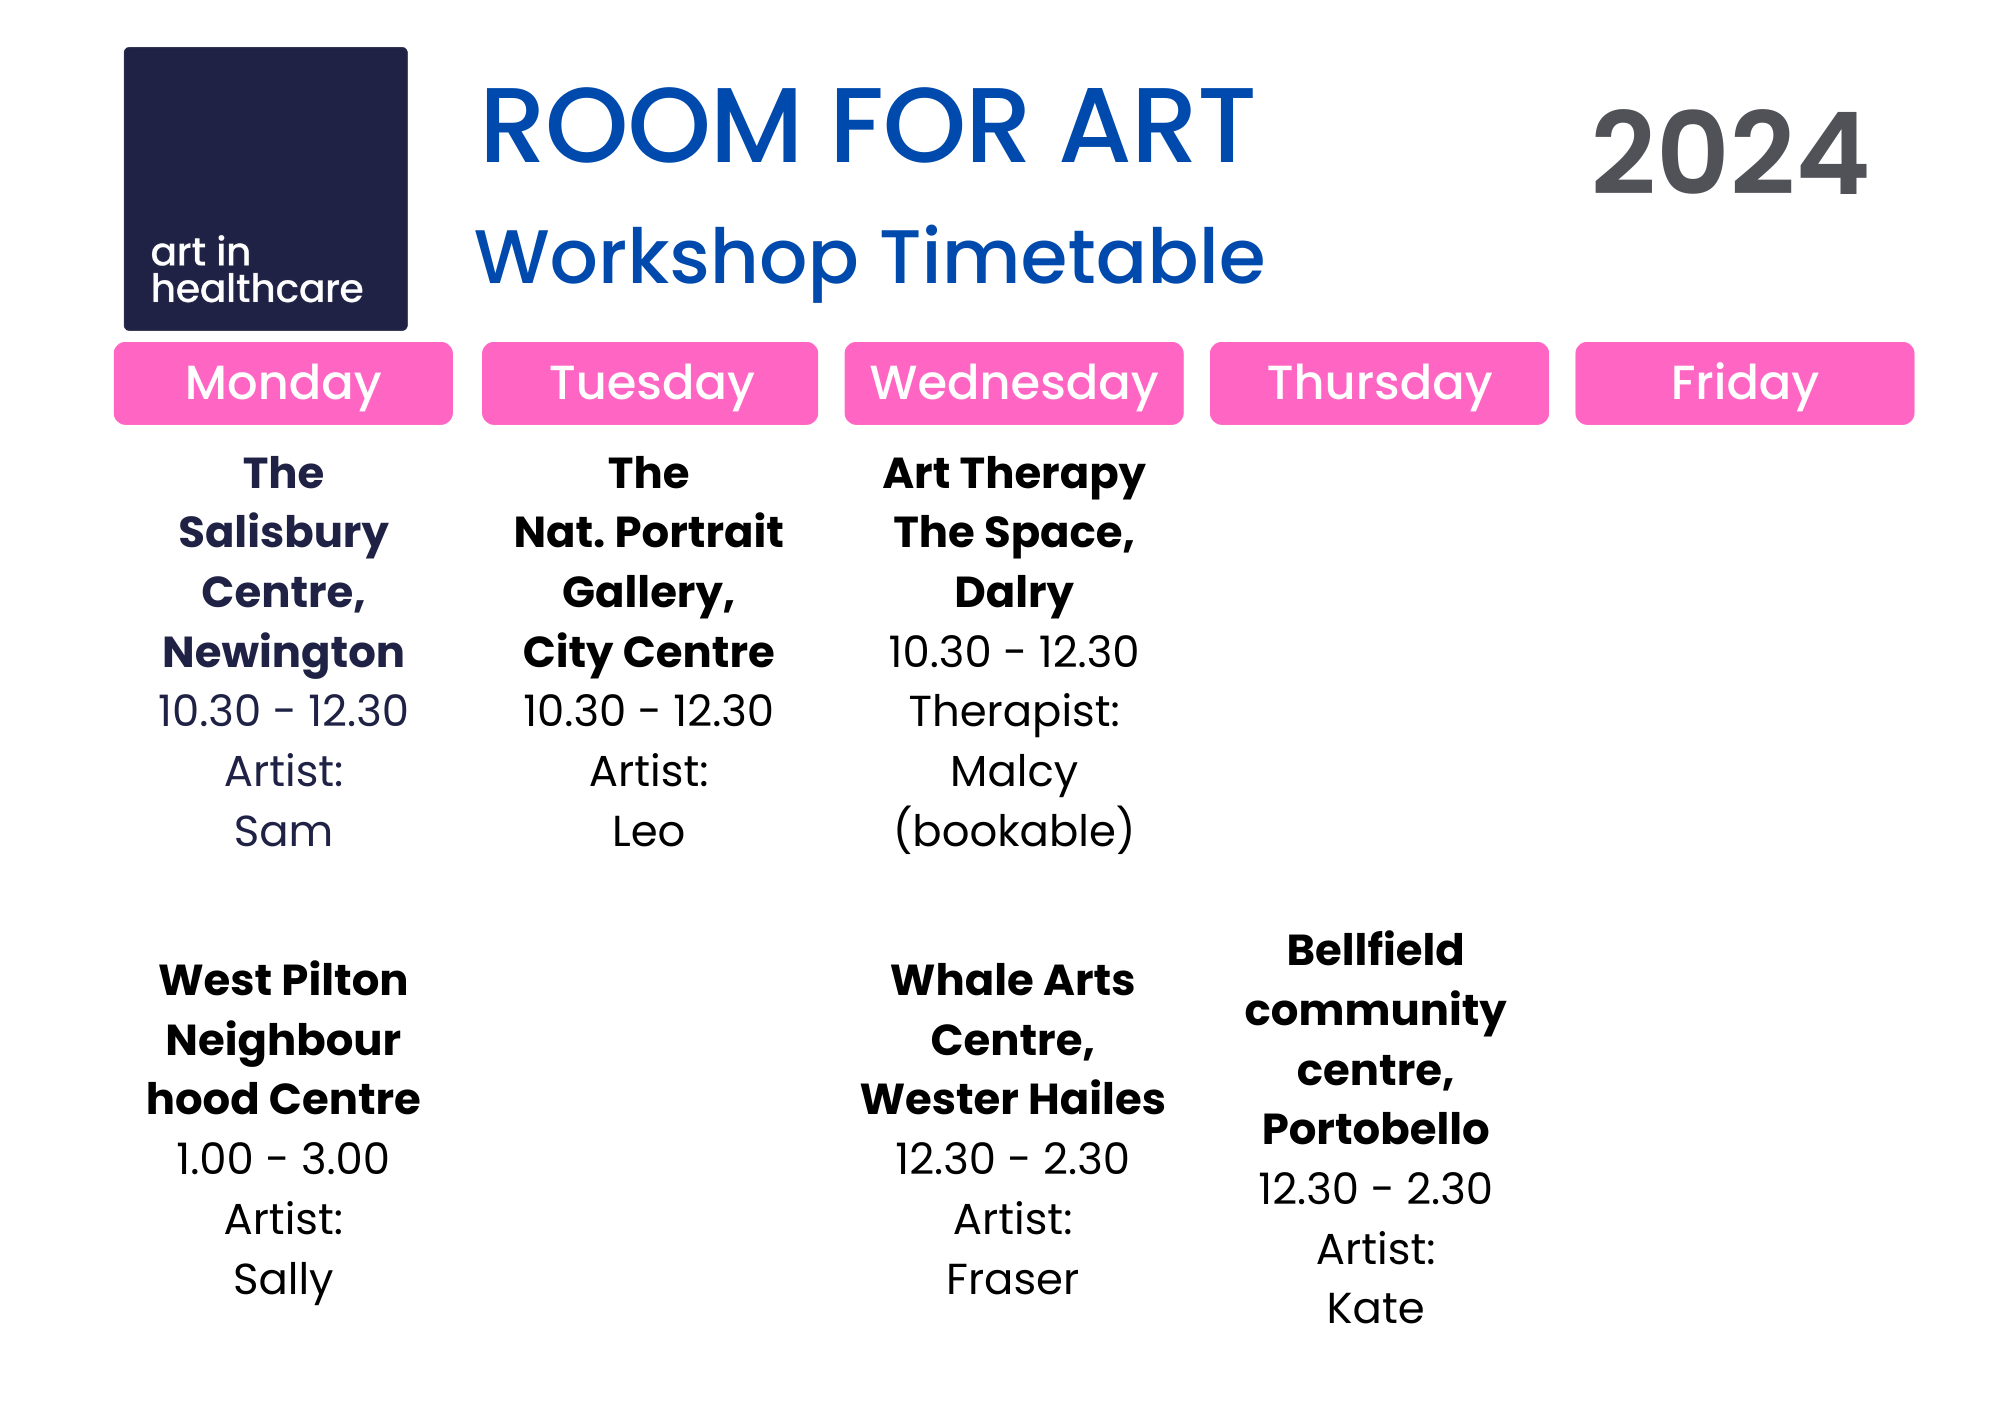 Room for Art Timetable